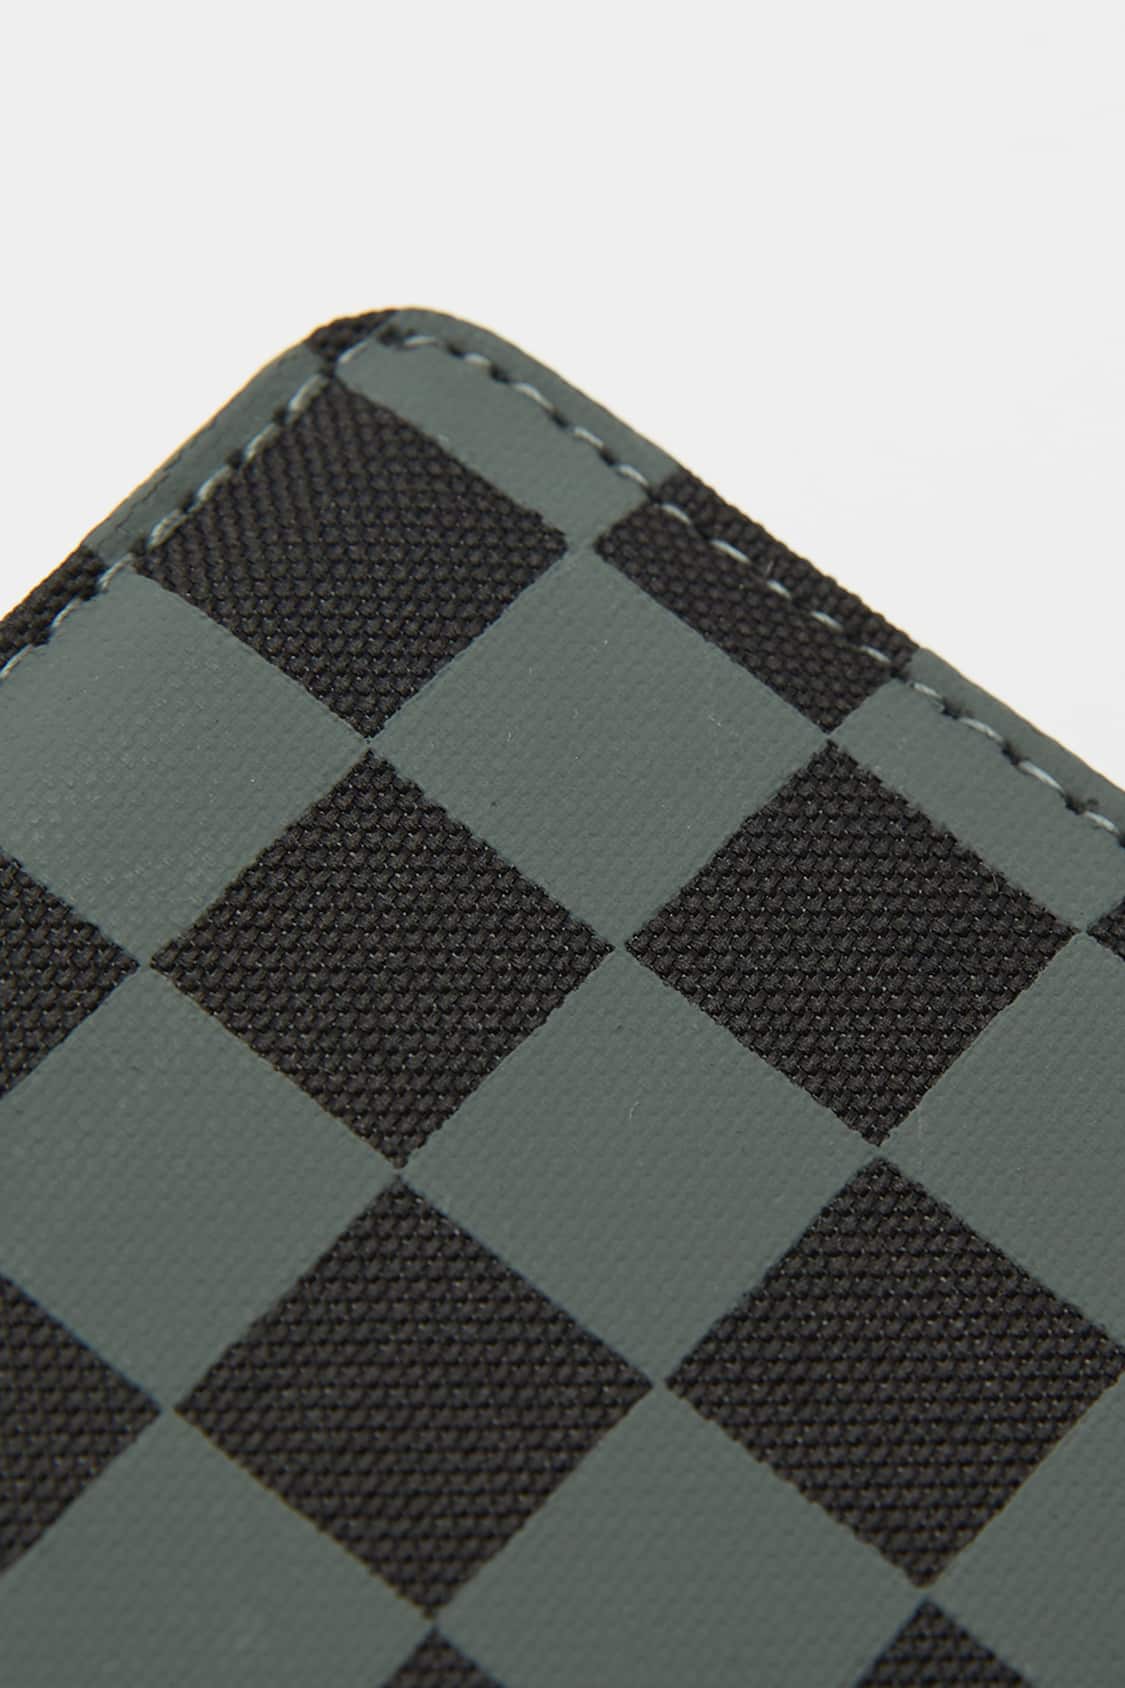 Pull&Bear Men's' Multicolor Checkered Faux Leather Wallet